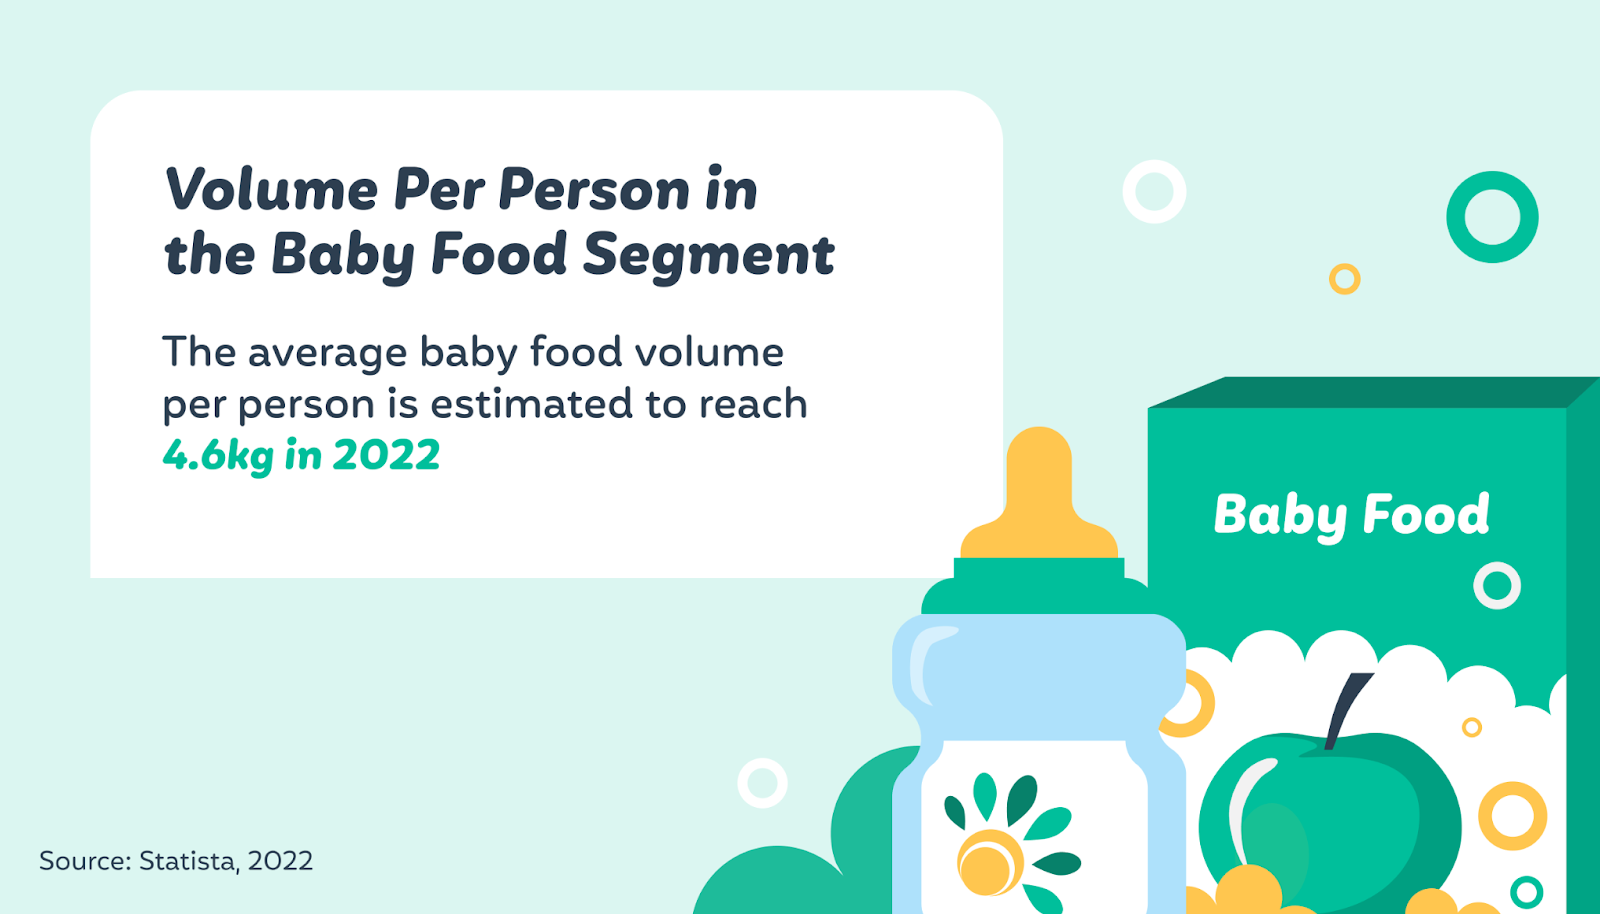 image showing the volume per person in the baby food segment